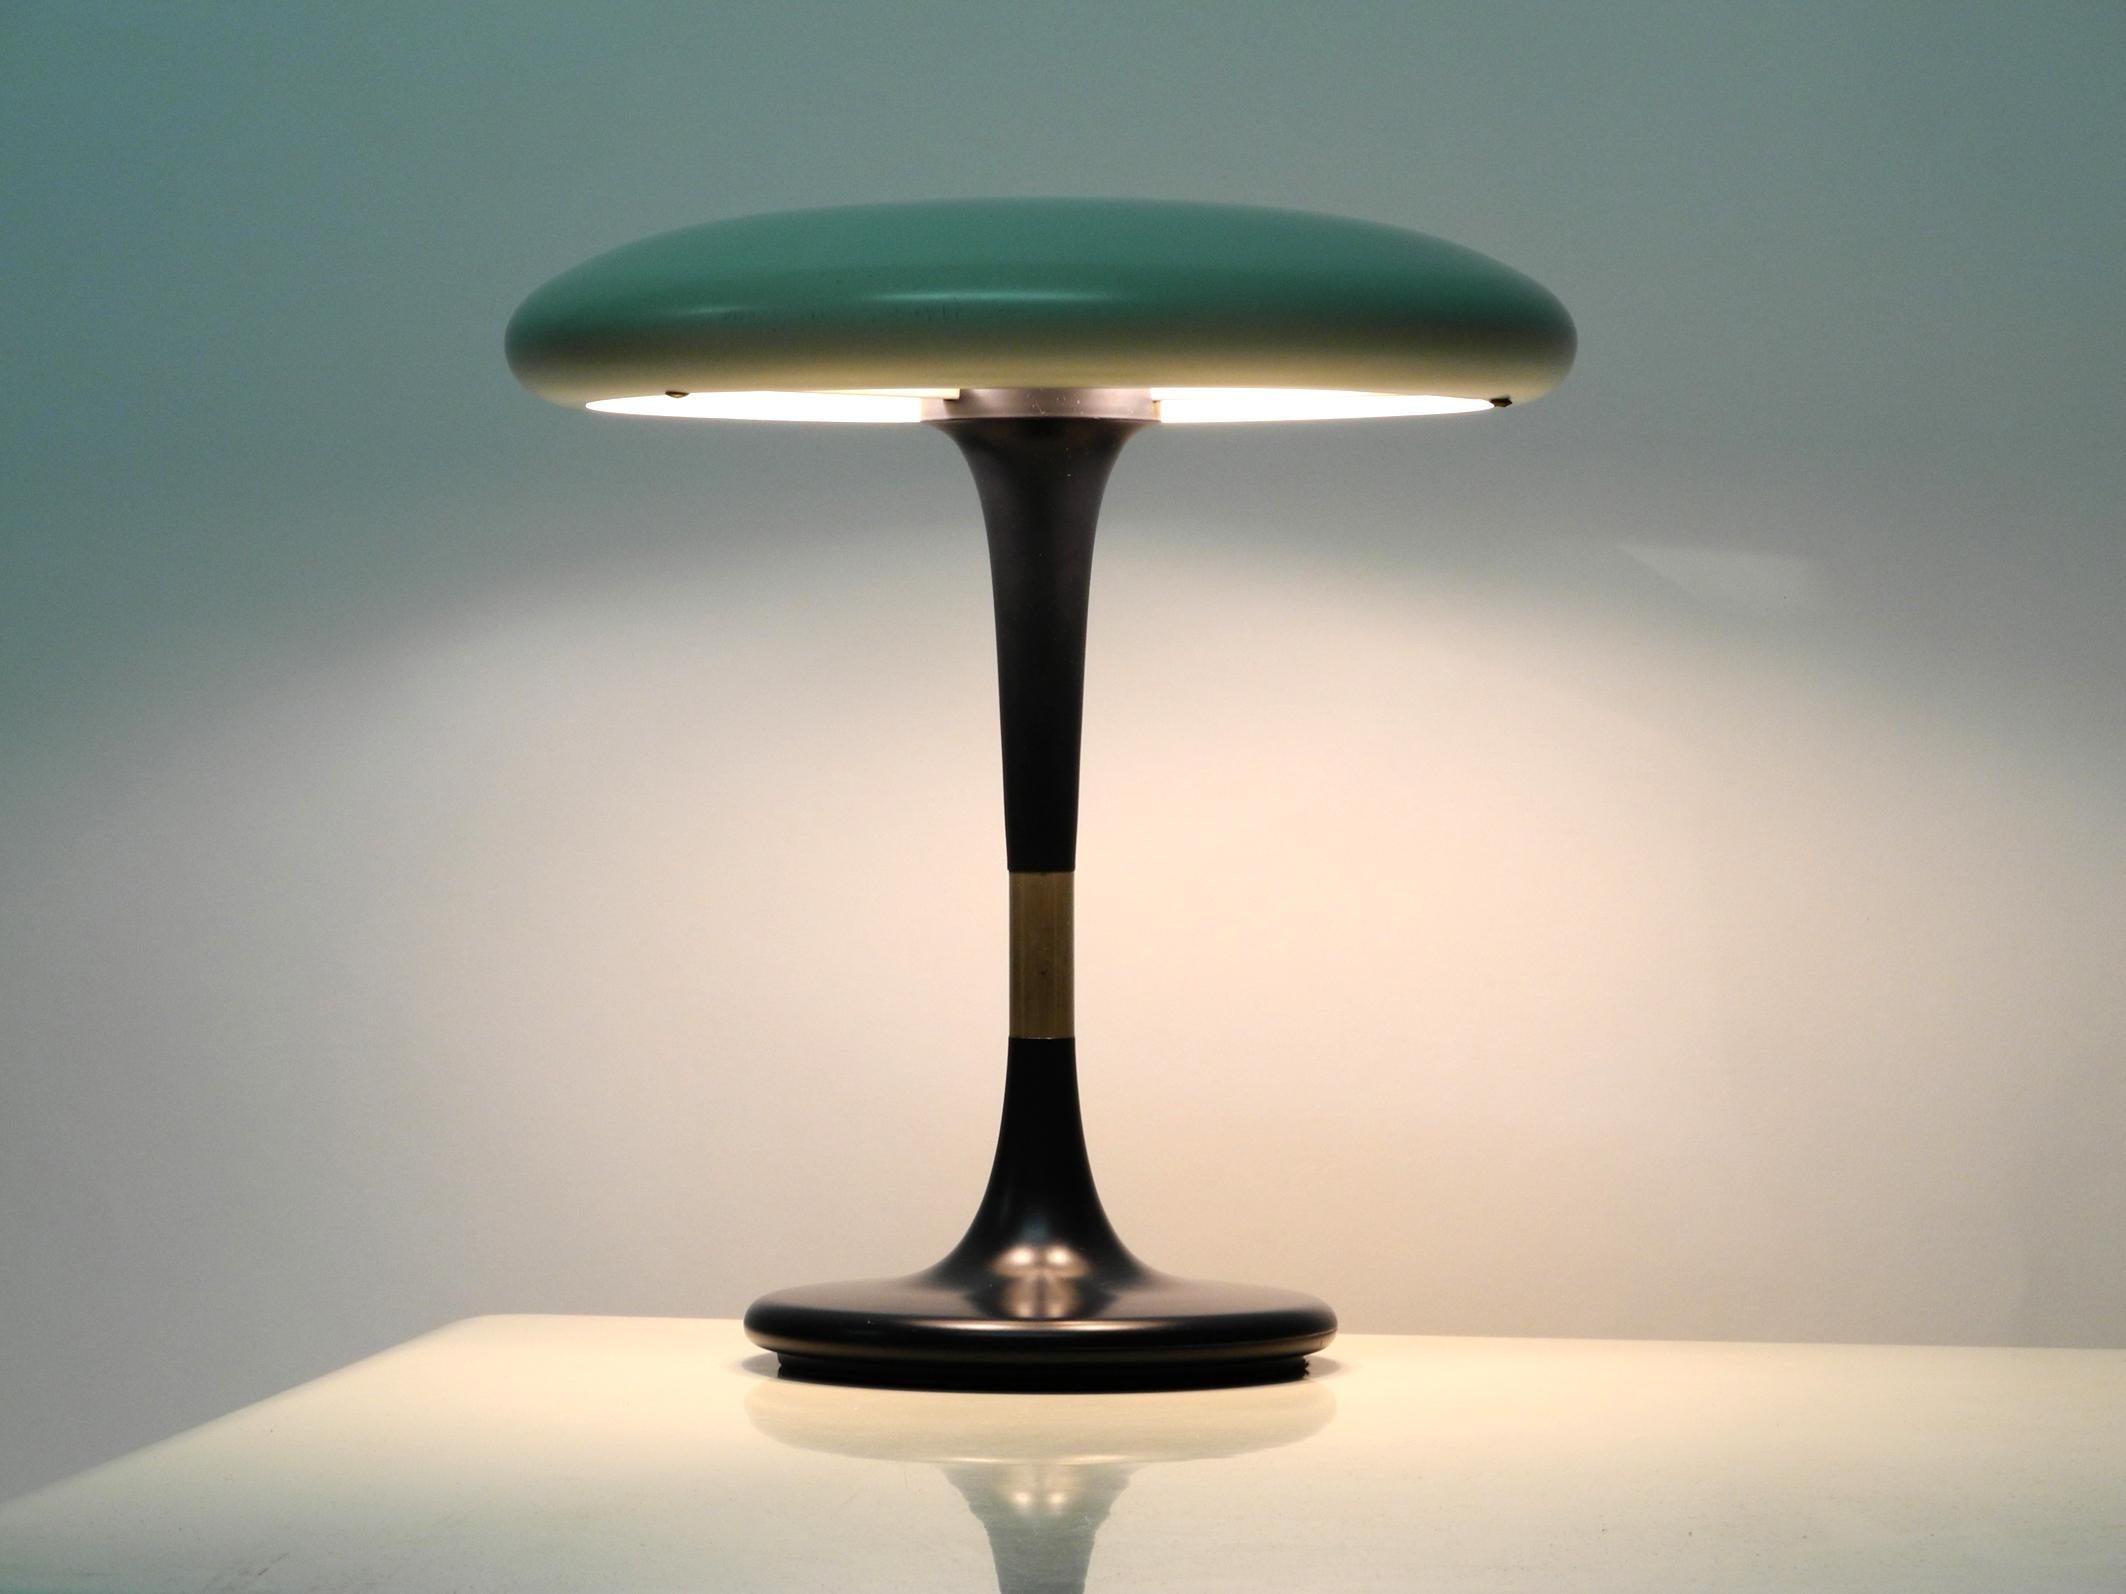 Very nice big 1960s Space Age Pop Art Mushroom table lamp.
Manufactured by Hillebrand. Made in Germany.
Very nice minimalistic Space Age design in very good condition.
Shade is made of light gray painted metal. The base and rod are made of black